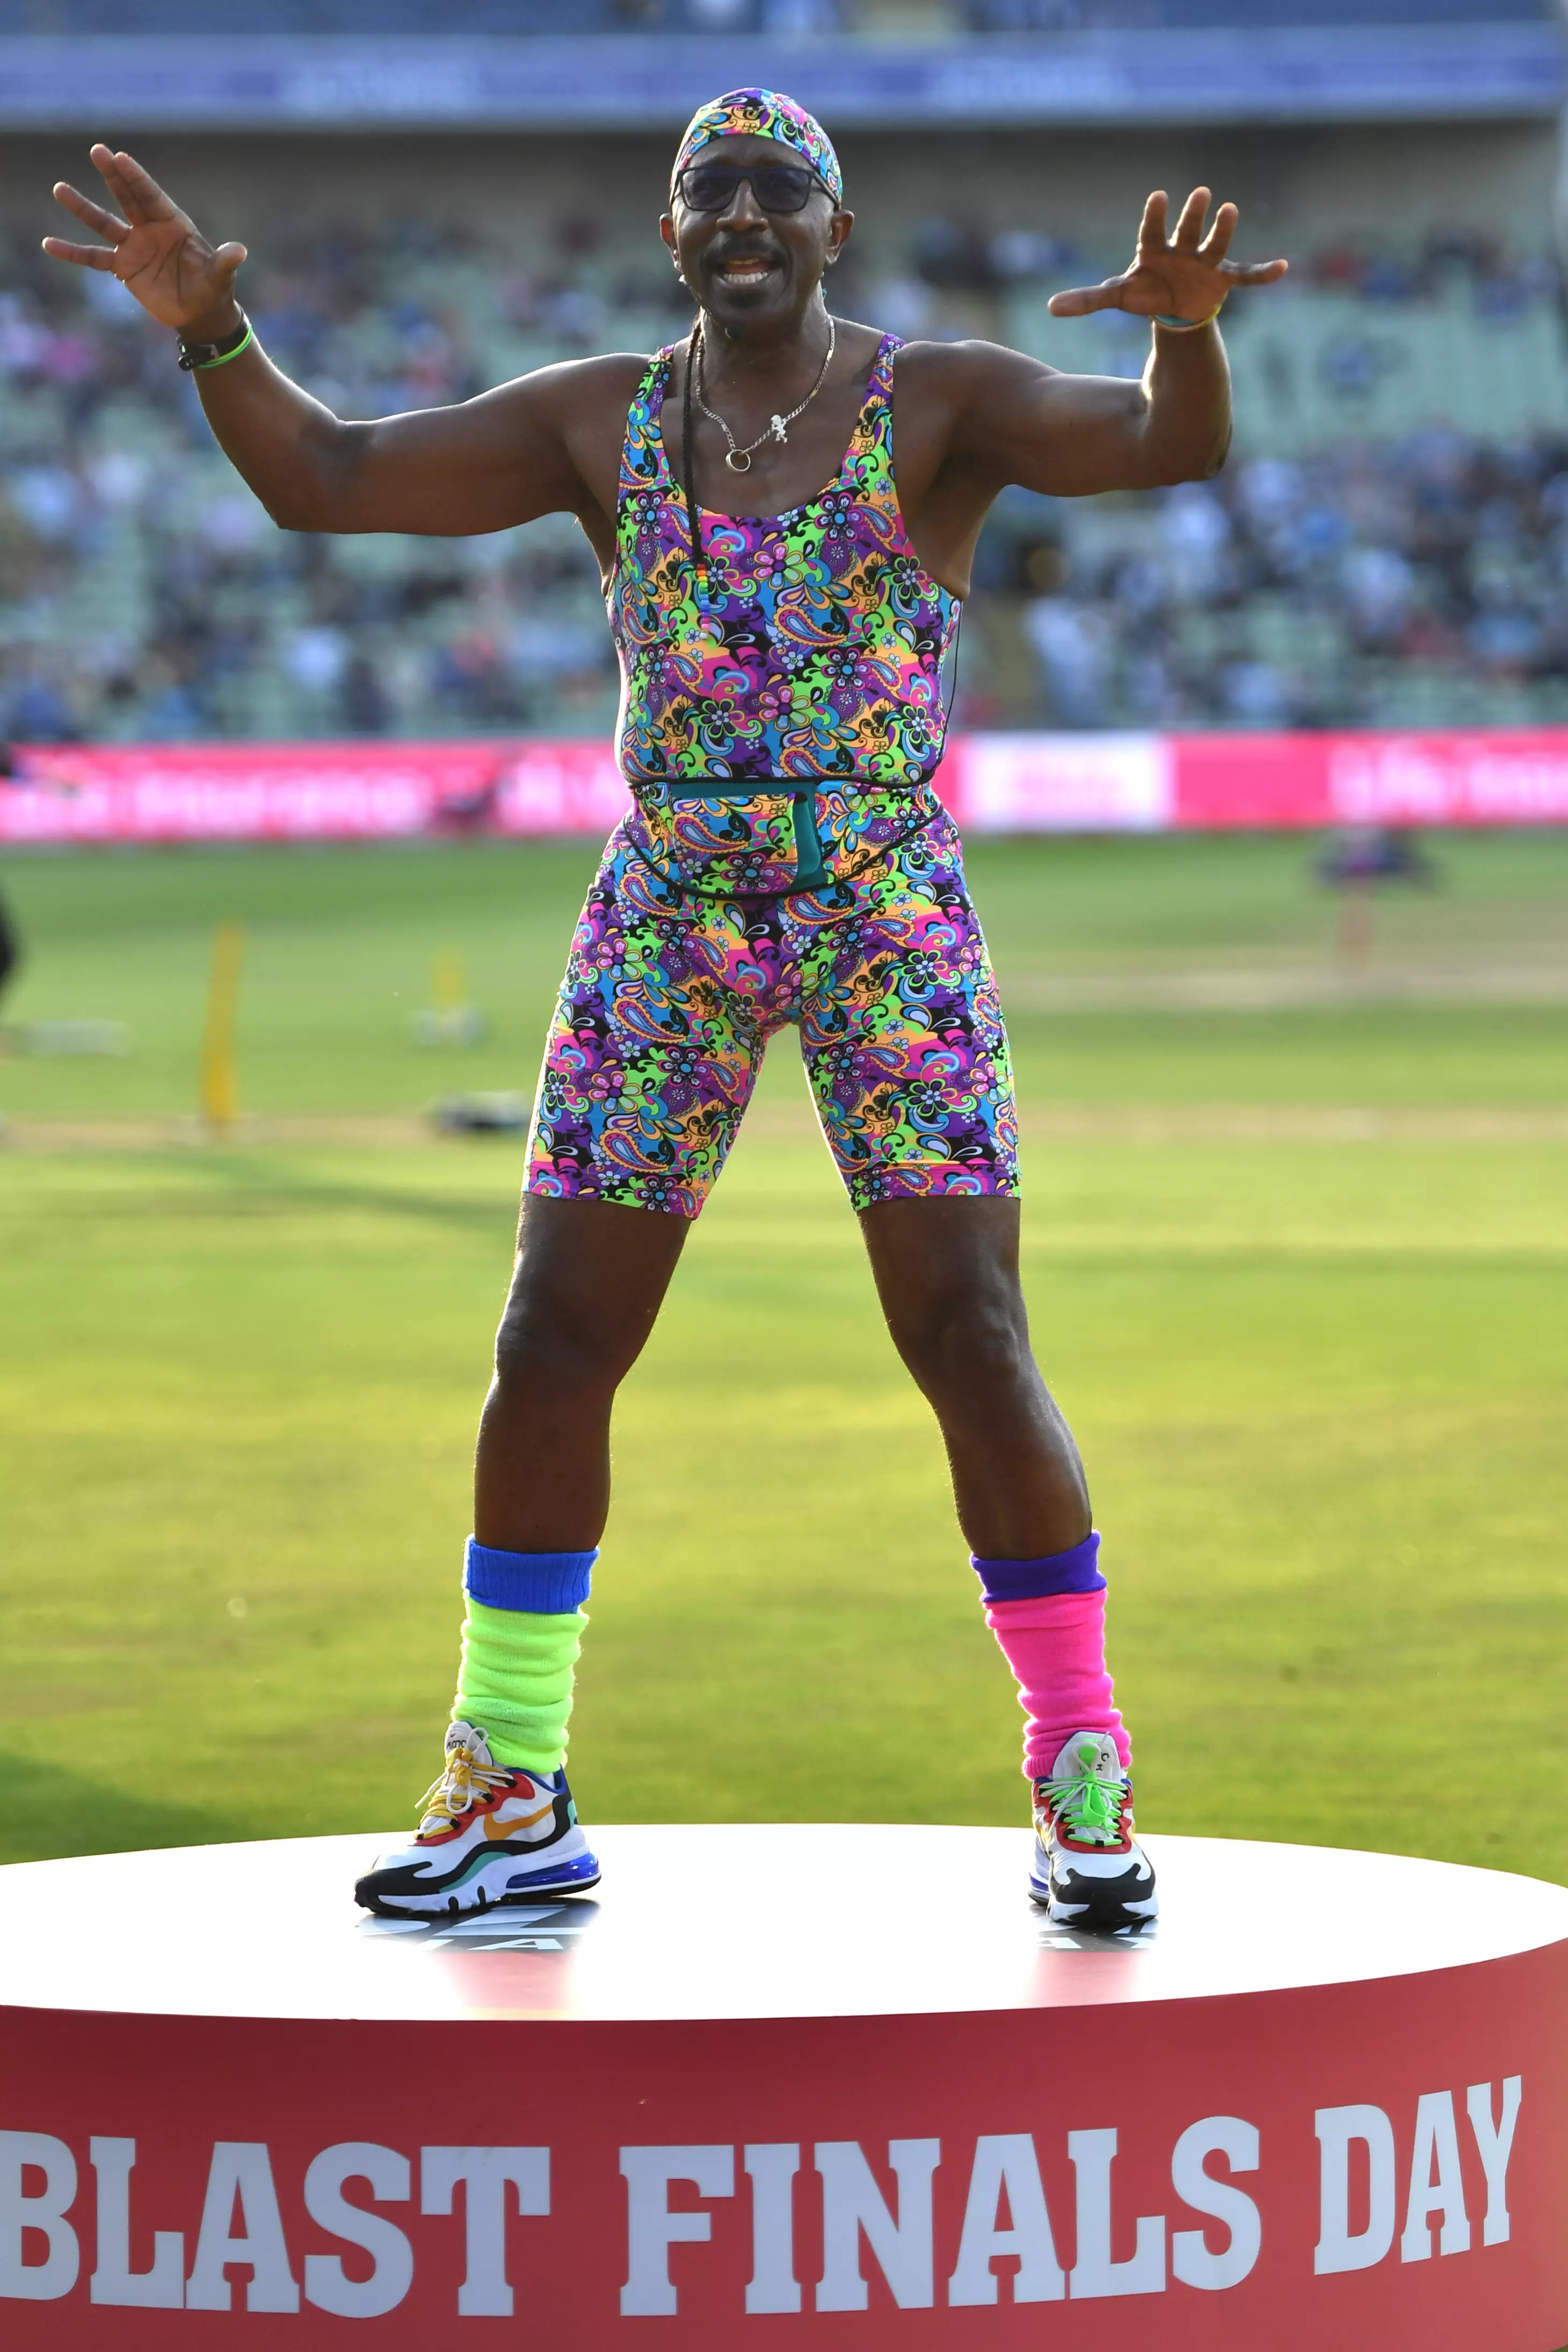 Mr Motivator's new workout has left some hot under the collar.